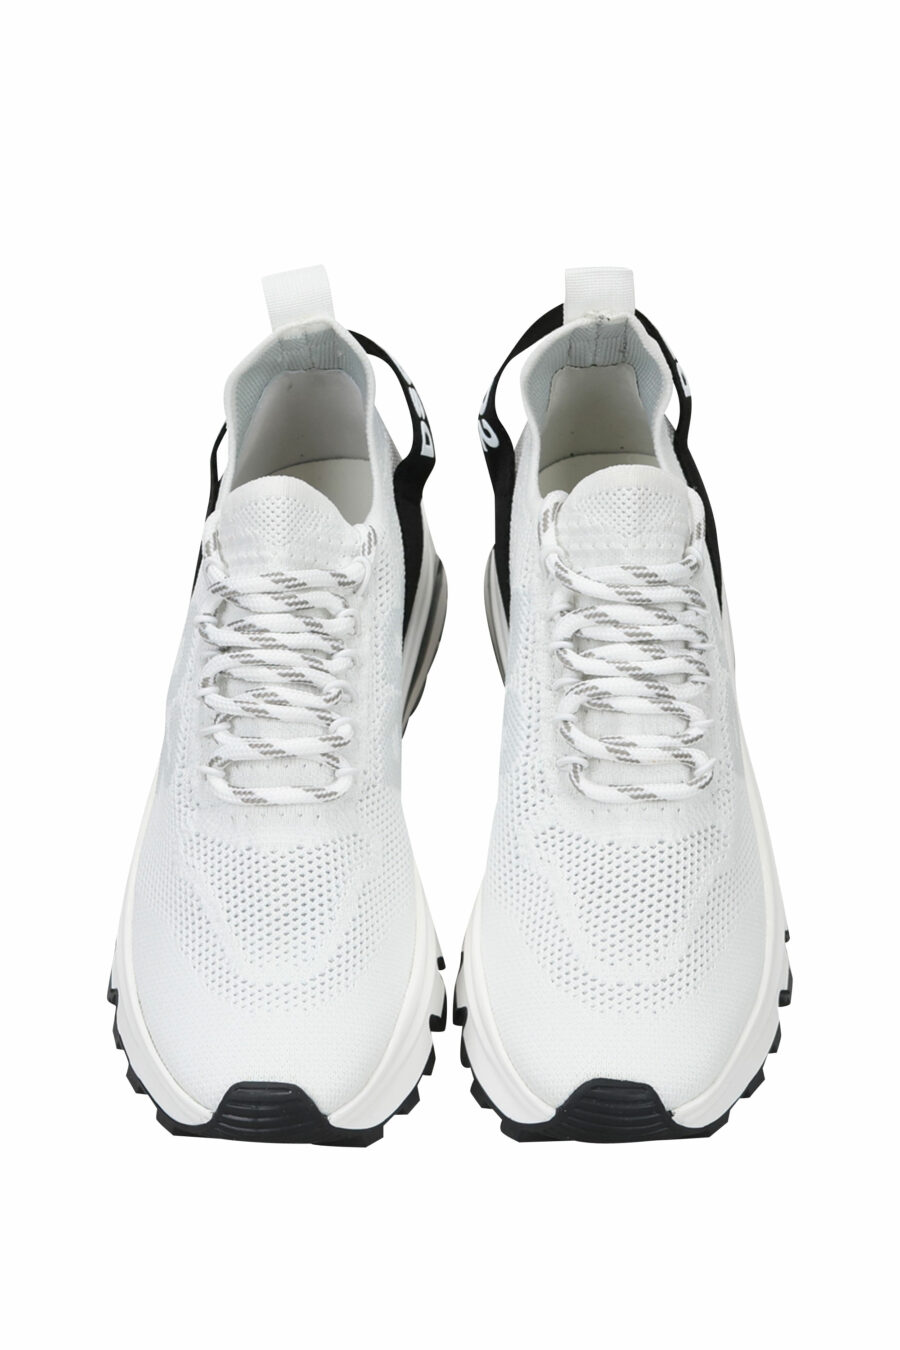 White trainers with black logo and inner tube sole - 8055777249857 4